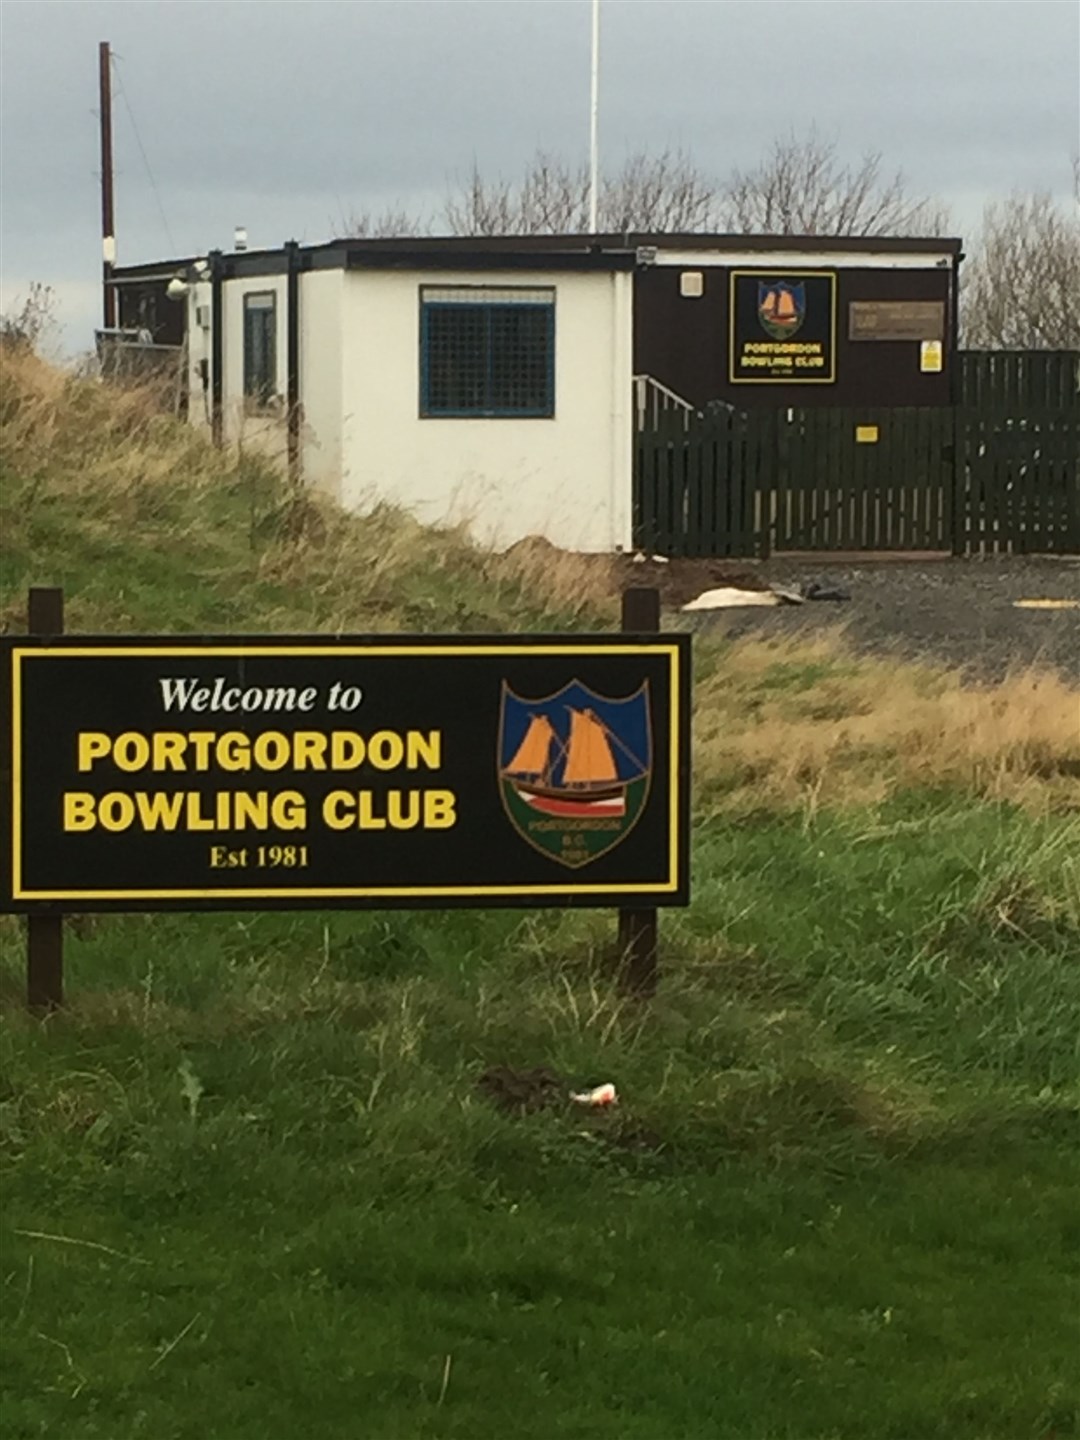 Portgordon Bowling Club has been handed a lifeline by the recent EGM.